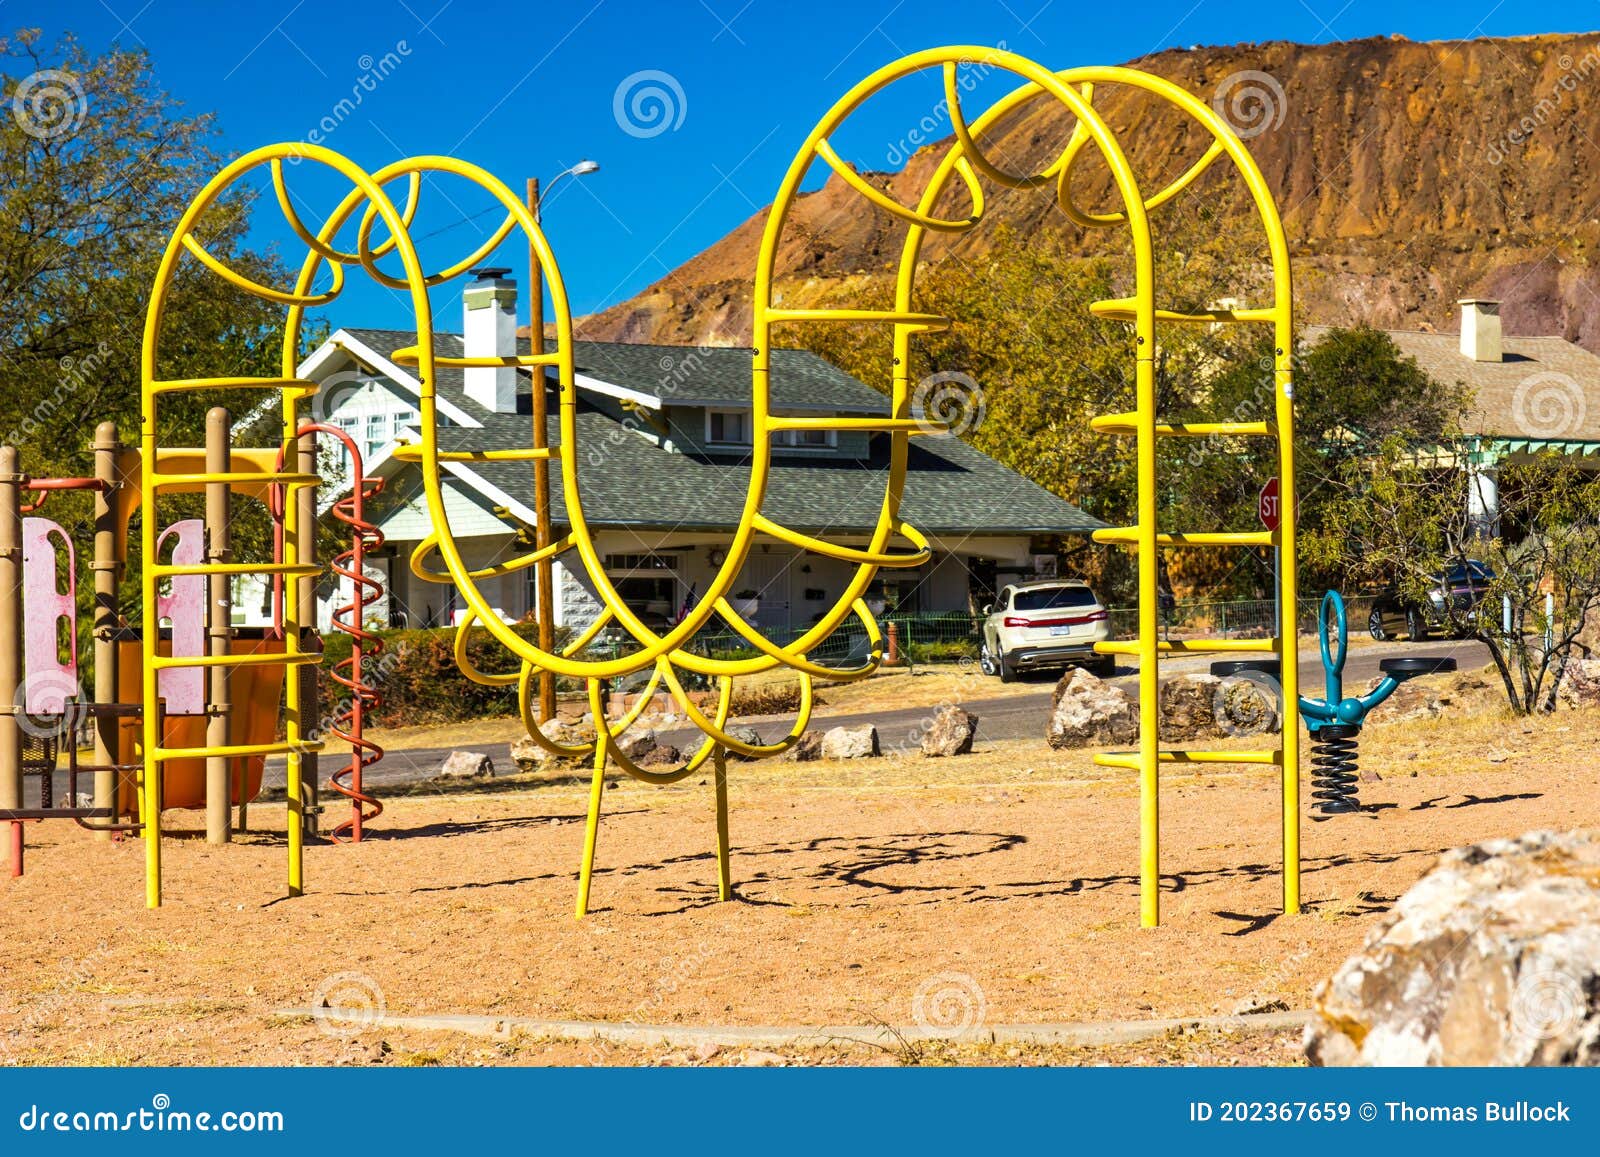 Curved Playground Slide Royalty Free Stock Photo